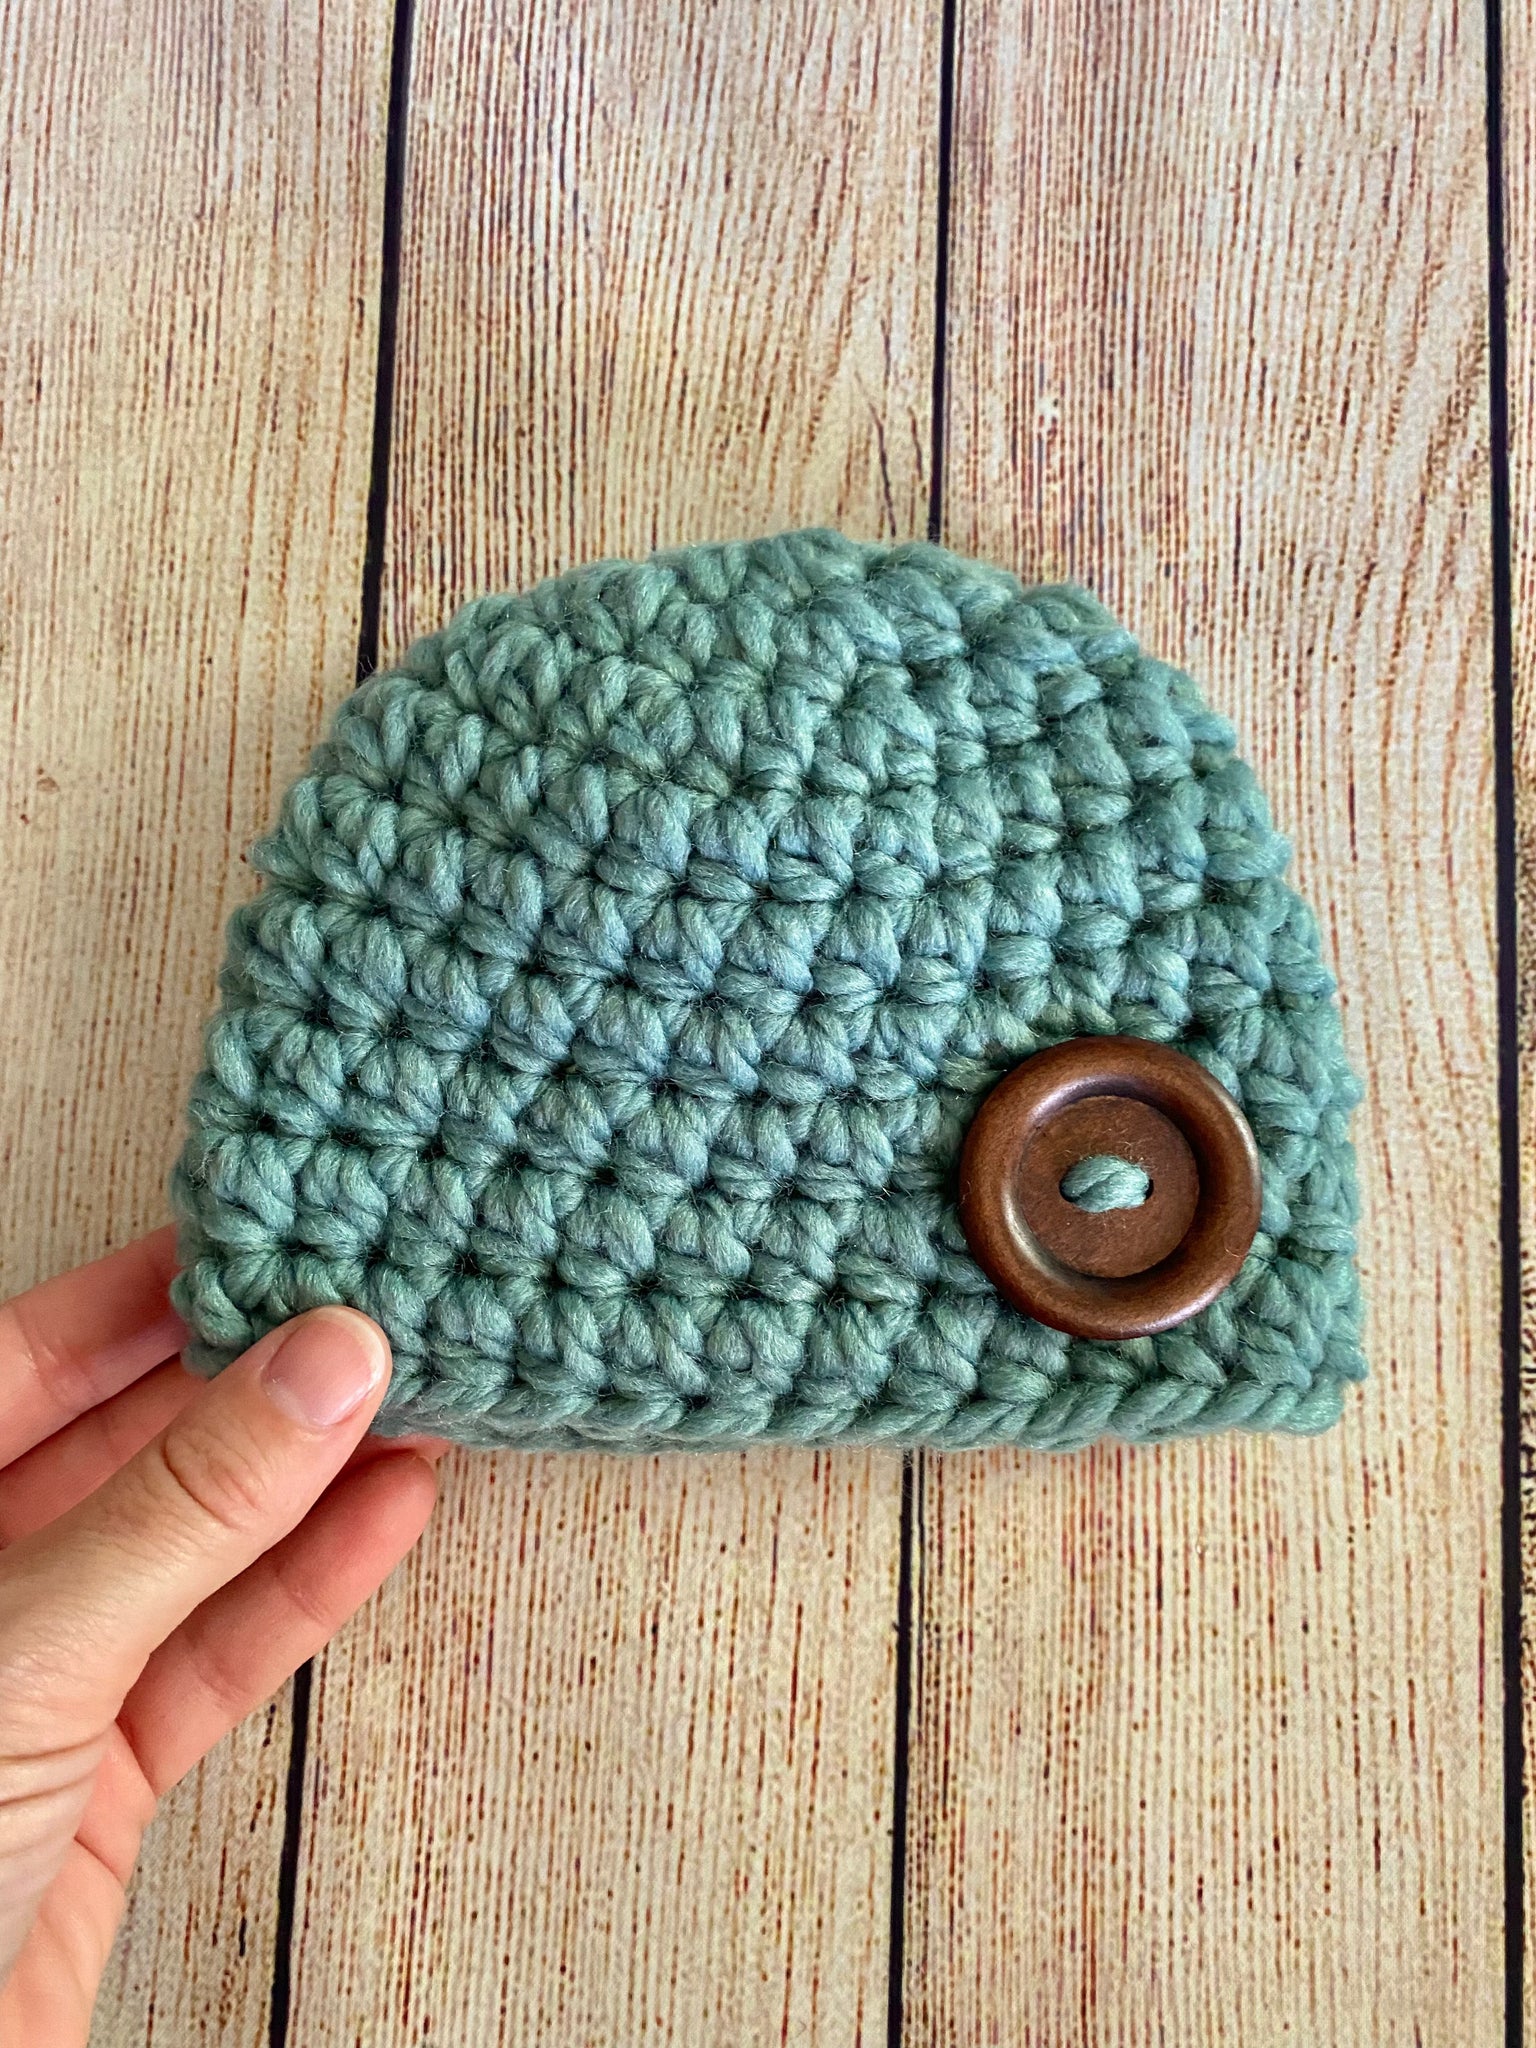 Seafoam marble button beanie baby hat by Two Seaside Babes